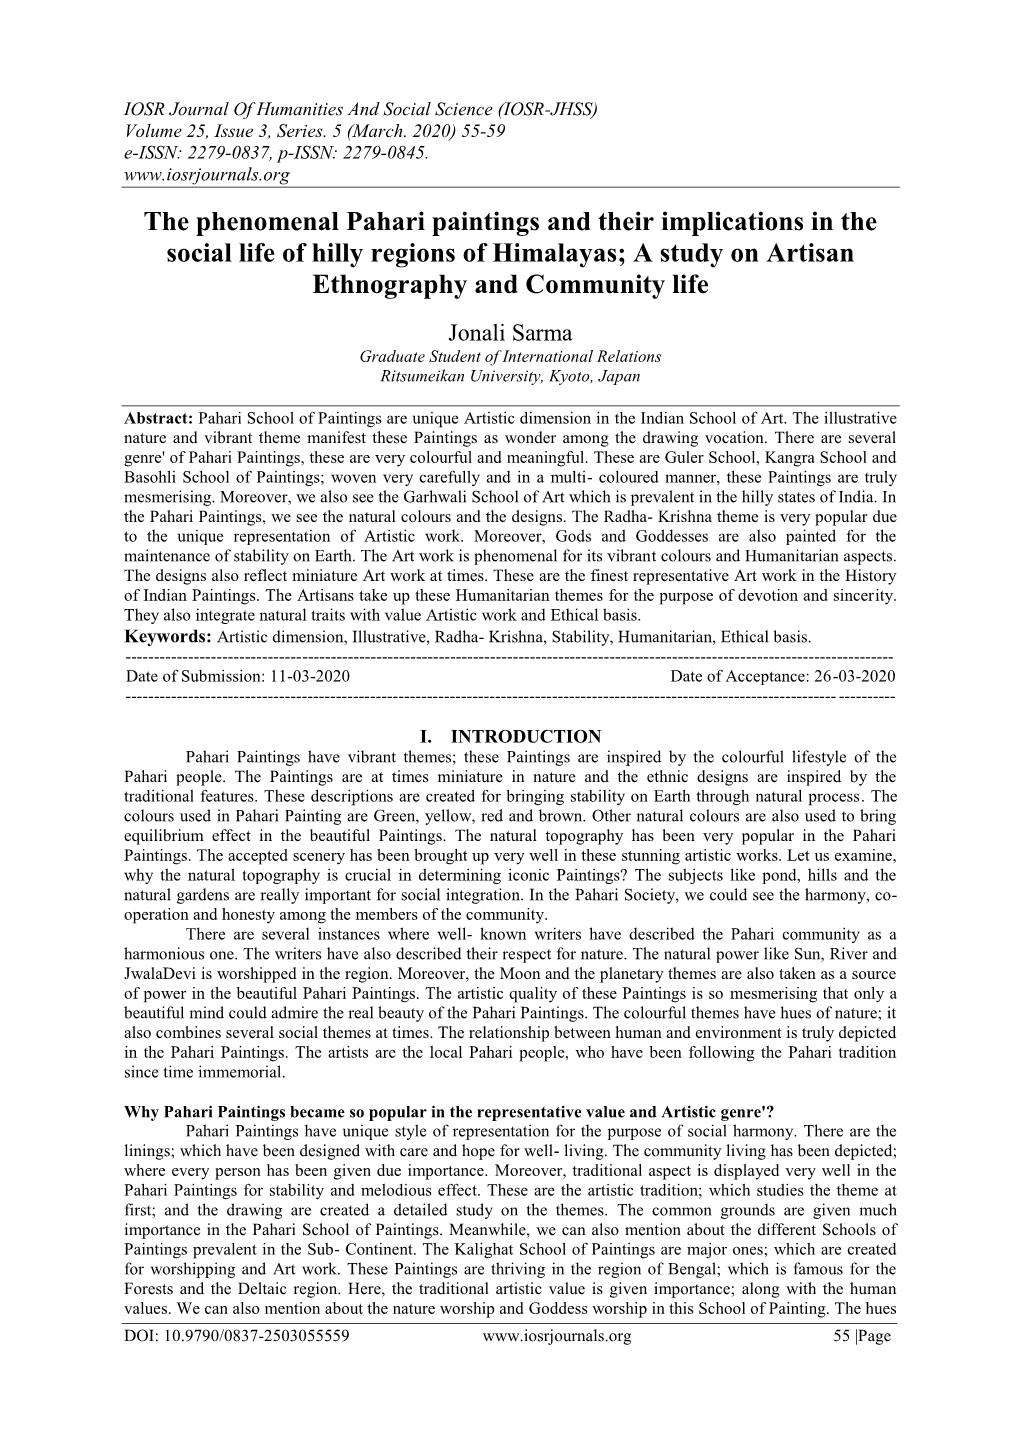 The Phenomenal Pahari Paintings and Their Implications in the Social Life of Hilly Regions of Himalayas; a Study on Artisan Ethnography and Community Life